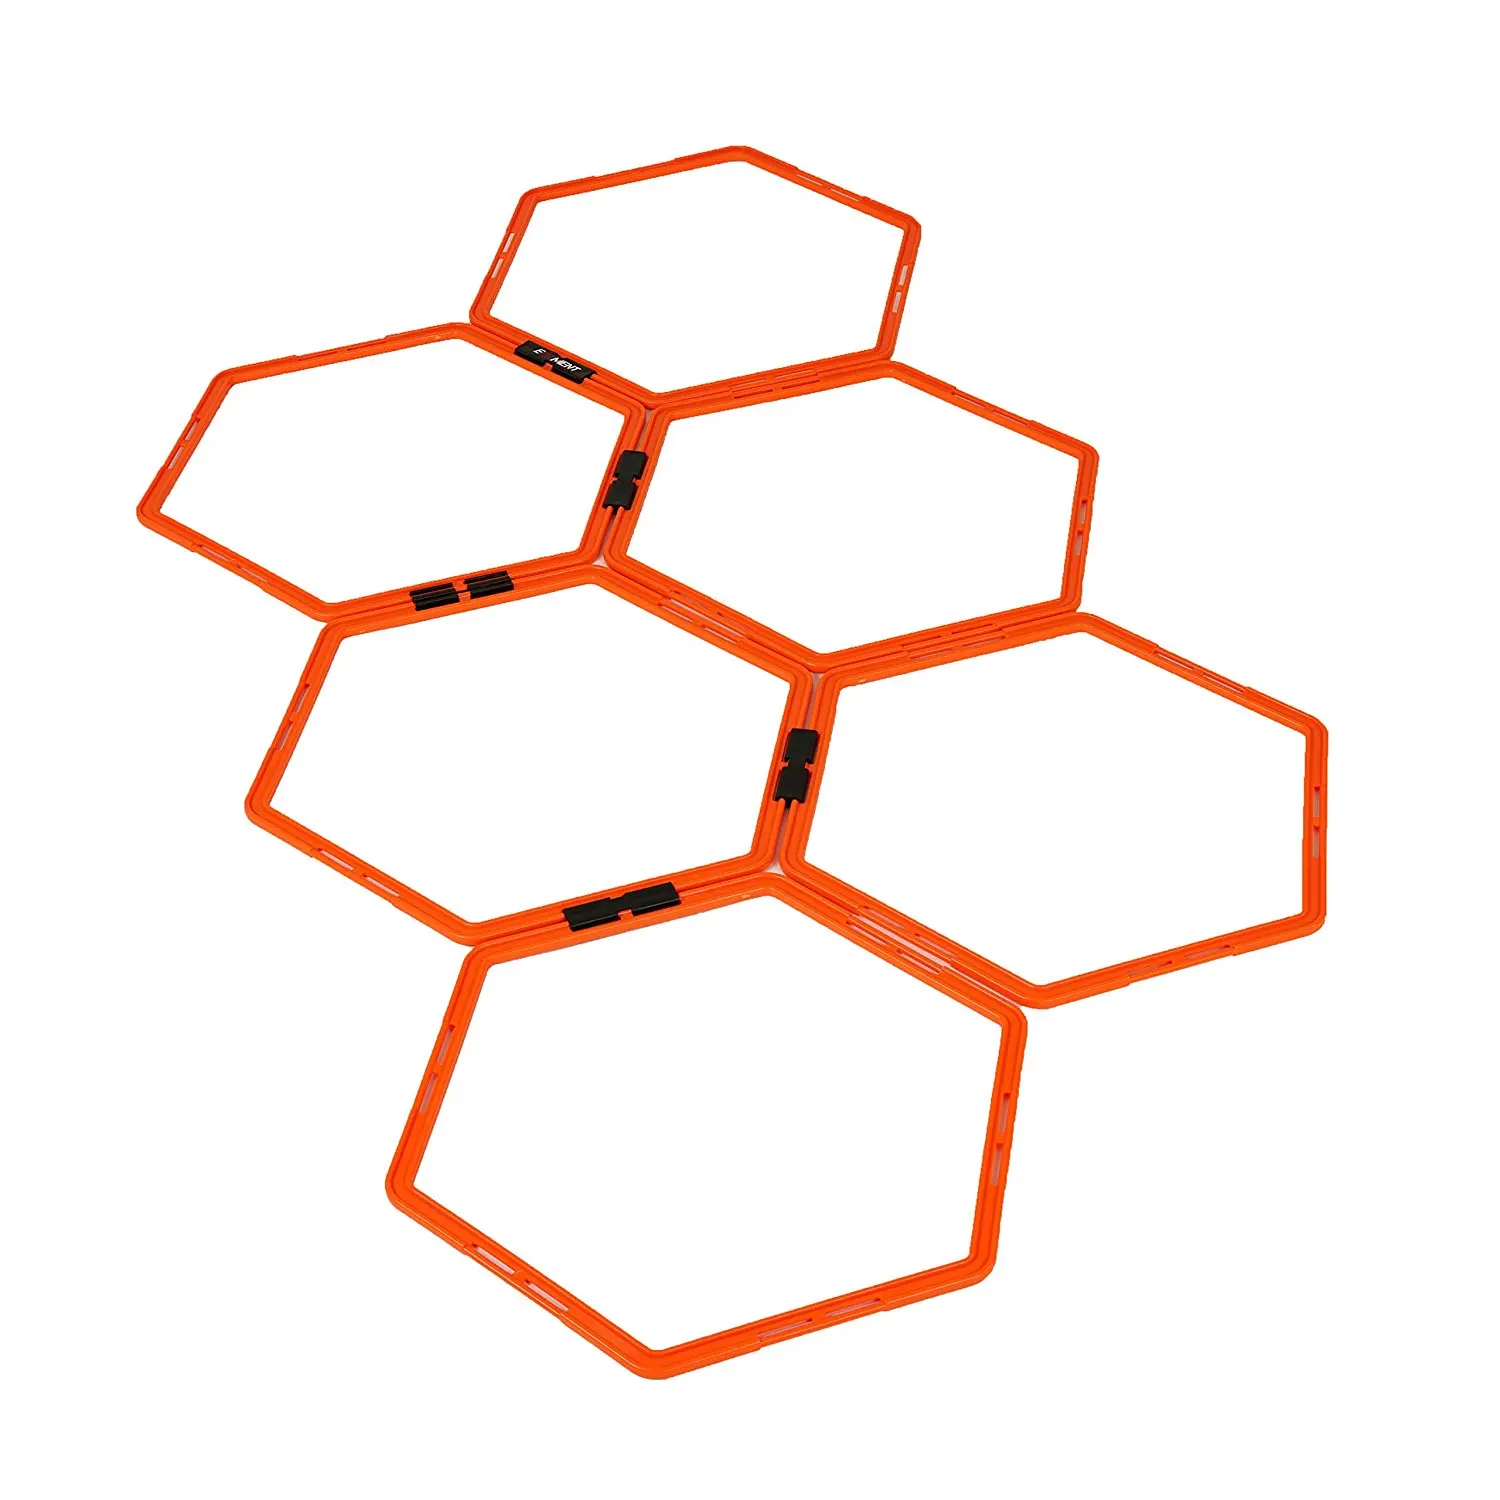 Fluorescent Orange ZARALA Hexagonal Ladder Set Features 6-Rungs of Hexes Plyometric Hex Speed Rings for Agility Footwork Training & Vertical Jump Workouts